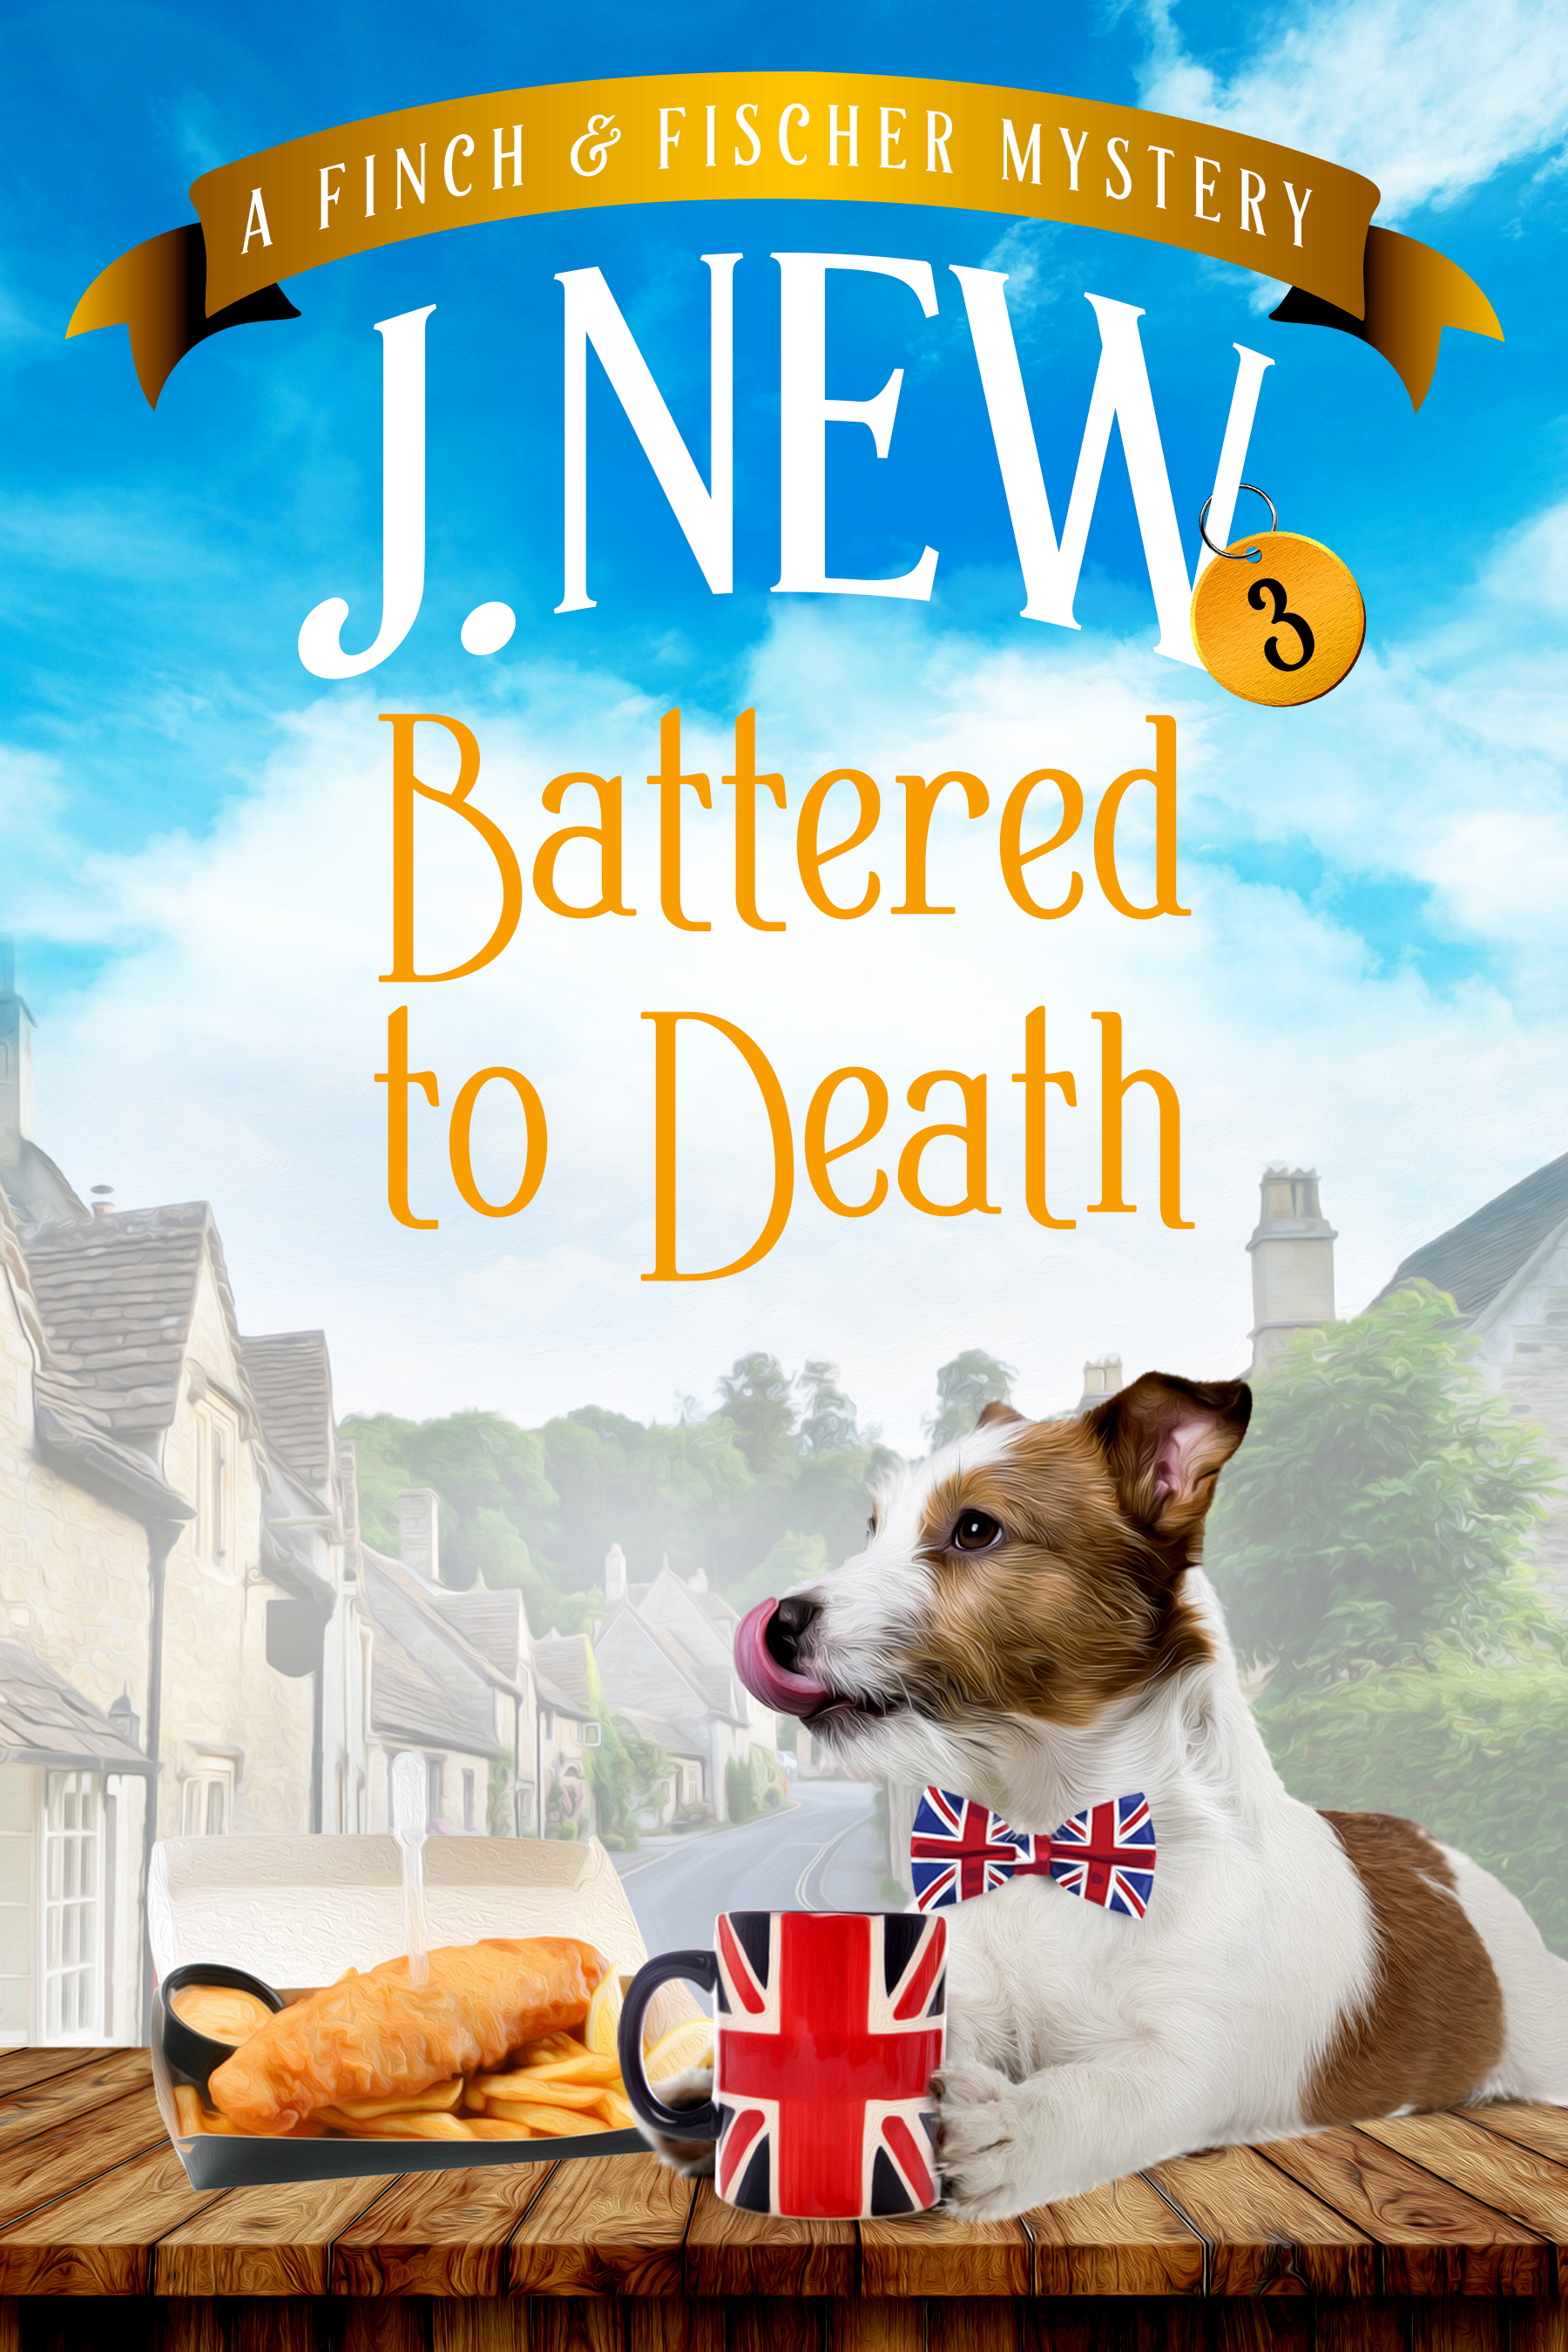 Battered to Death Book 3 in the fun filled British cozy mystery series by J. New featuring mobile librarian Penny Finch and her rescue pup dog detective Fischer